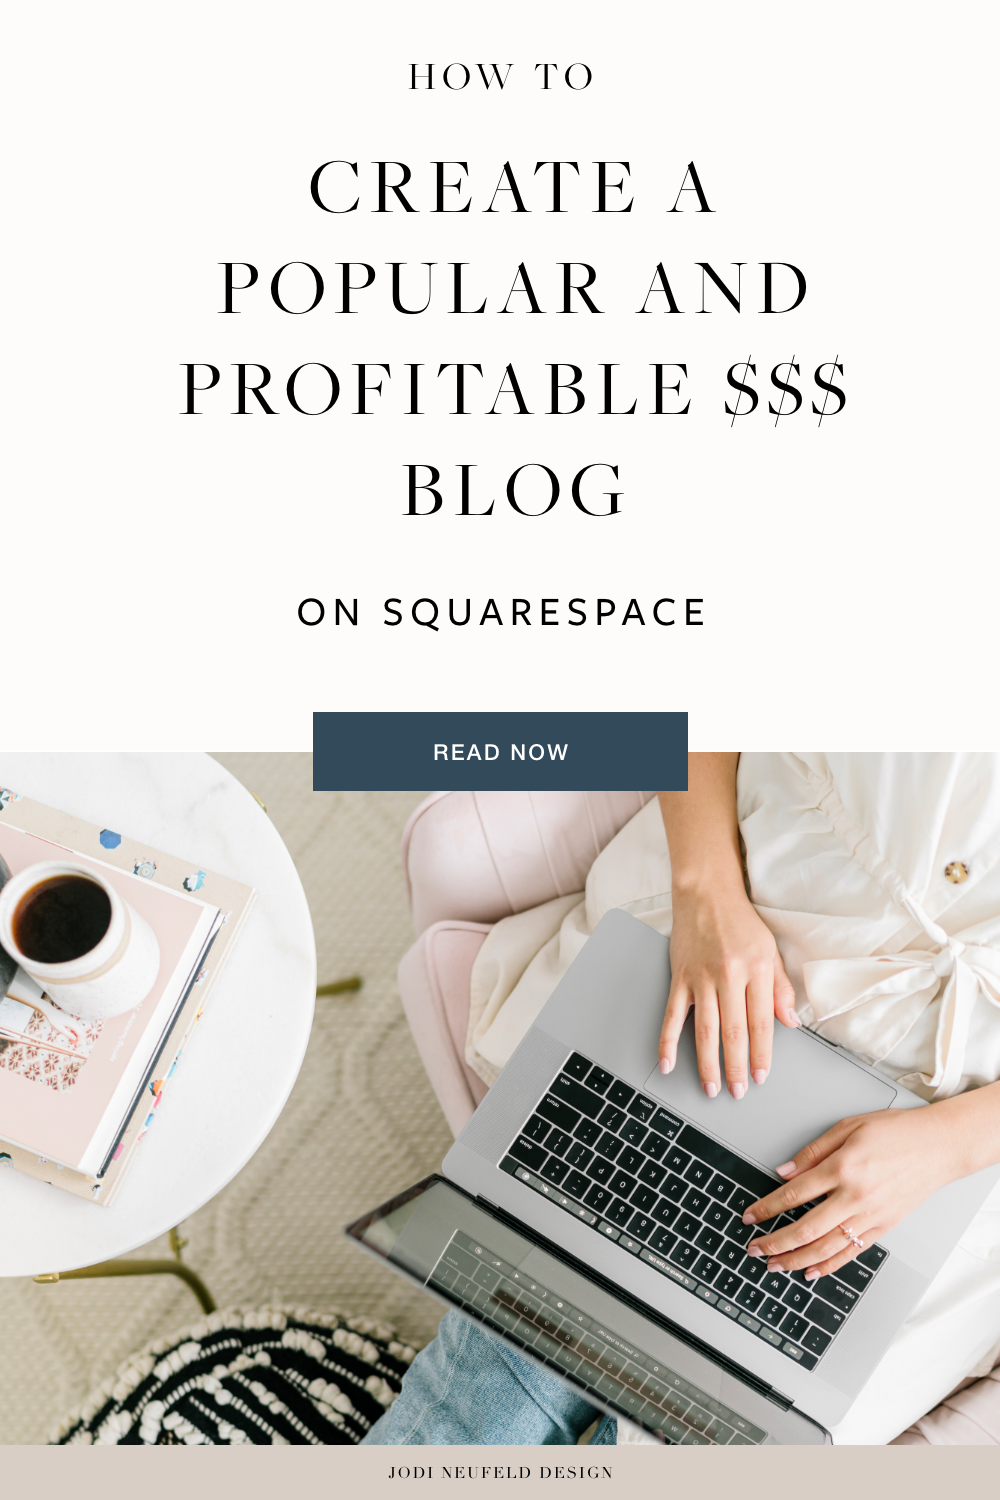 How to create a profitable blog on Squarespace | pin graphic 8 | Jodi Neufeld Design.png